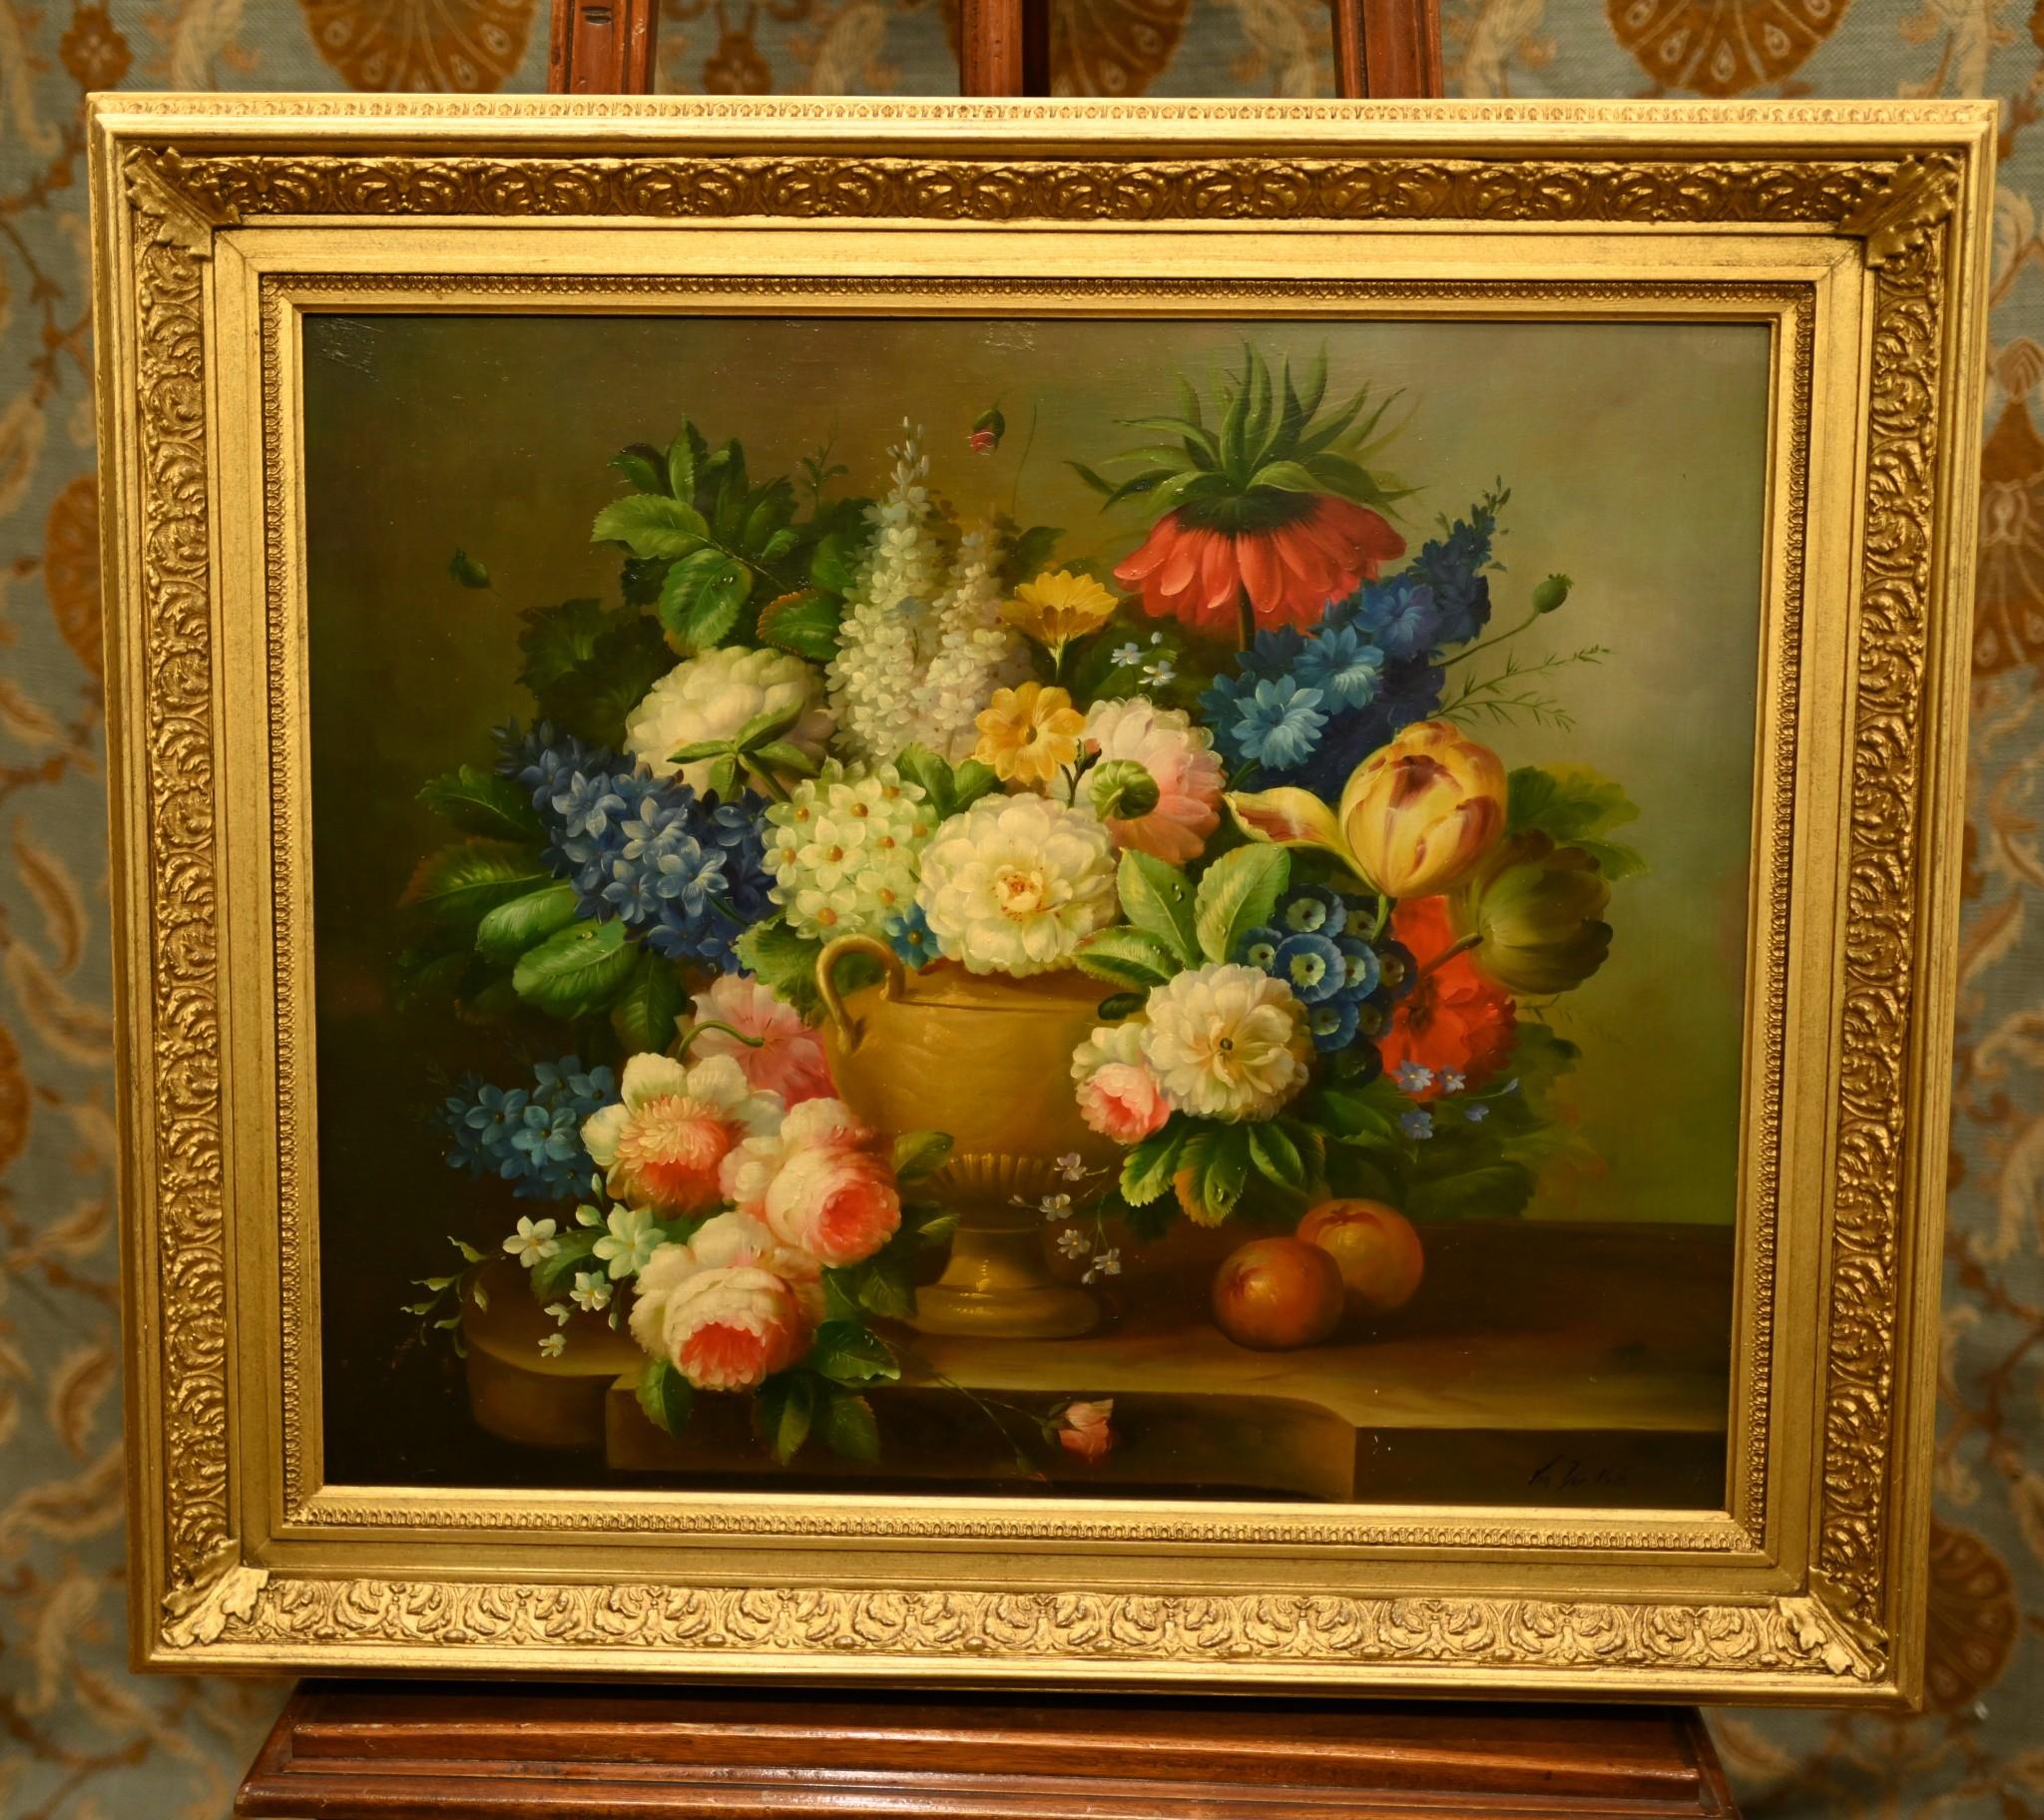 Gorgeous and vivid Dutch still life oil painting
Very vibrant work showing a colourful floral arrangement
Piece is signed Van Der Hout in the bottom right corner
Van Der Hout has really captured the energy and vibrancy to the flowers
This will add